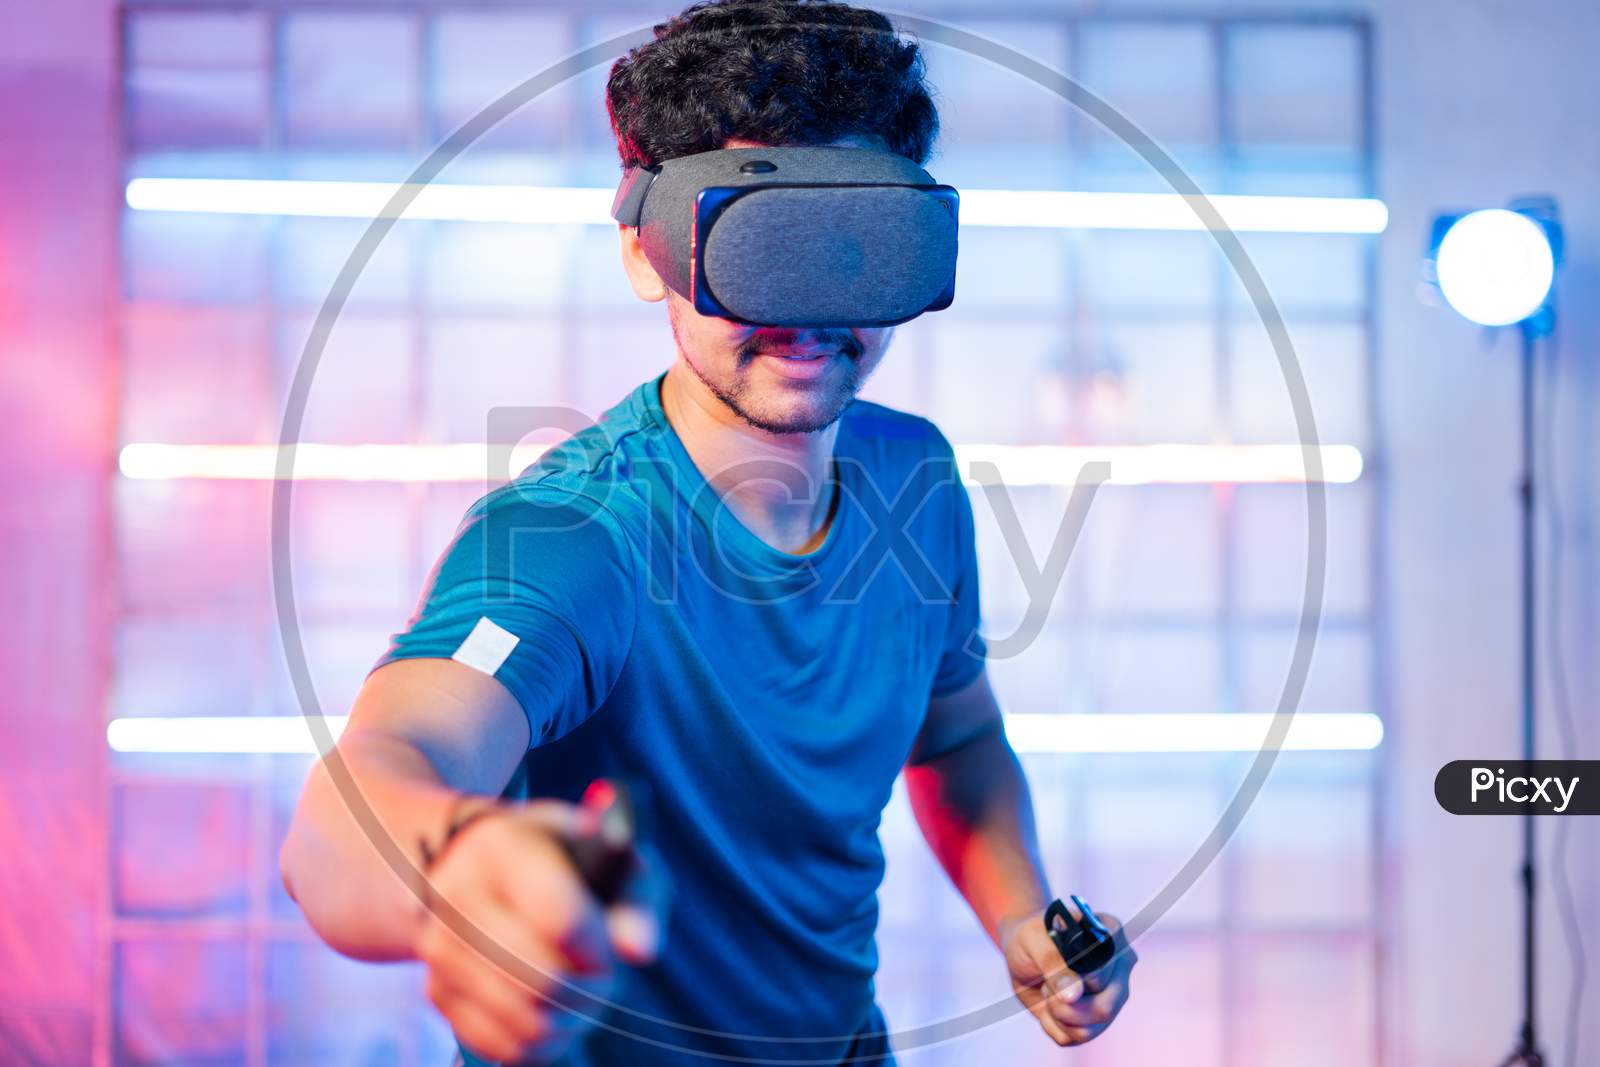 Young Man Playing Video Game By Wearing Vr Or Virtual Reality Goggles And Holding Joysticks In Hands - Concept Of Modern Gaming Technology